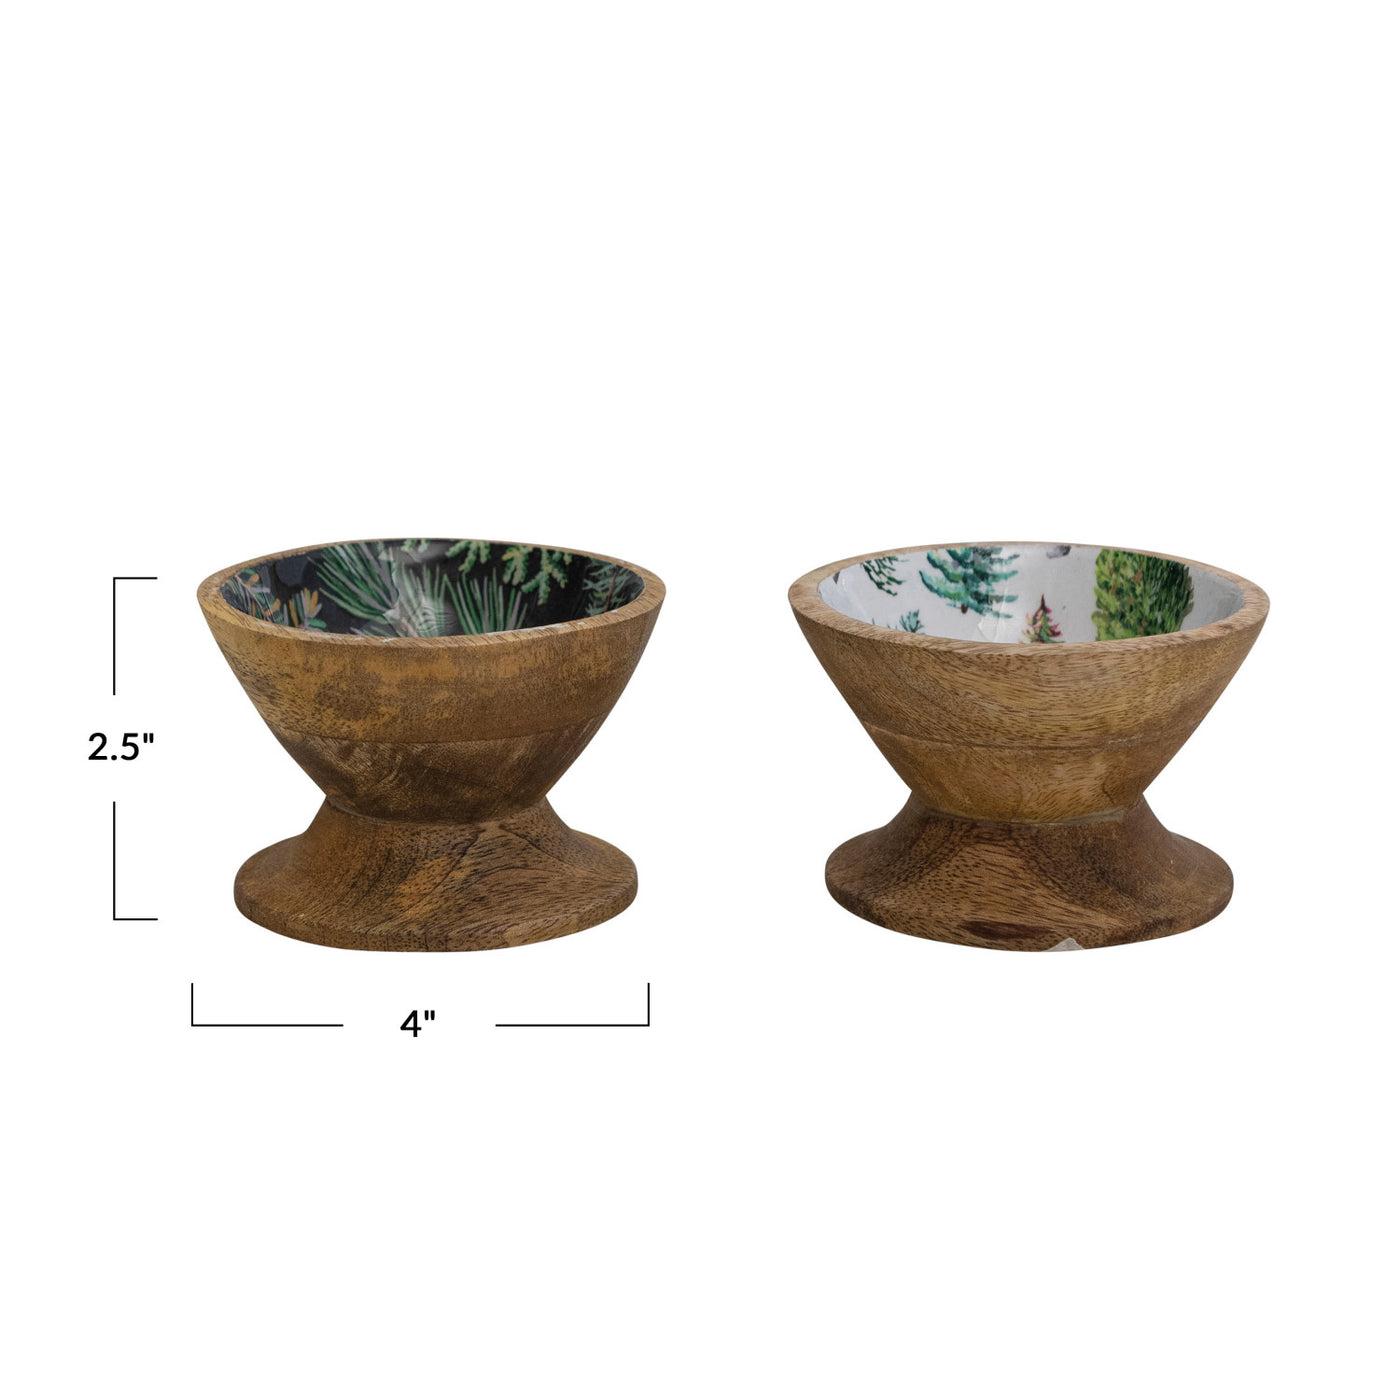 4" Round x 2-1/2"H Enameled Mango Wood Footed Bowl, Evergreens & Pine Boughs